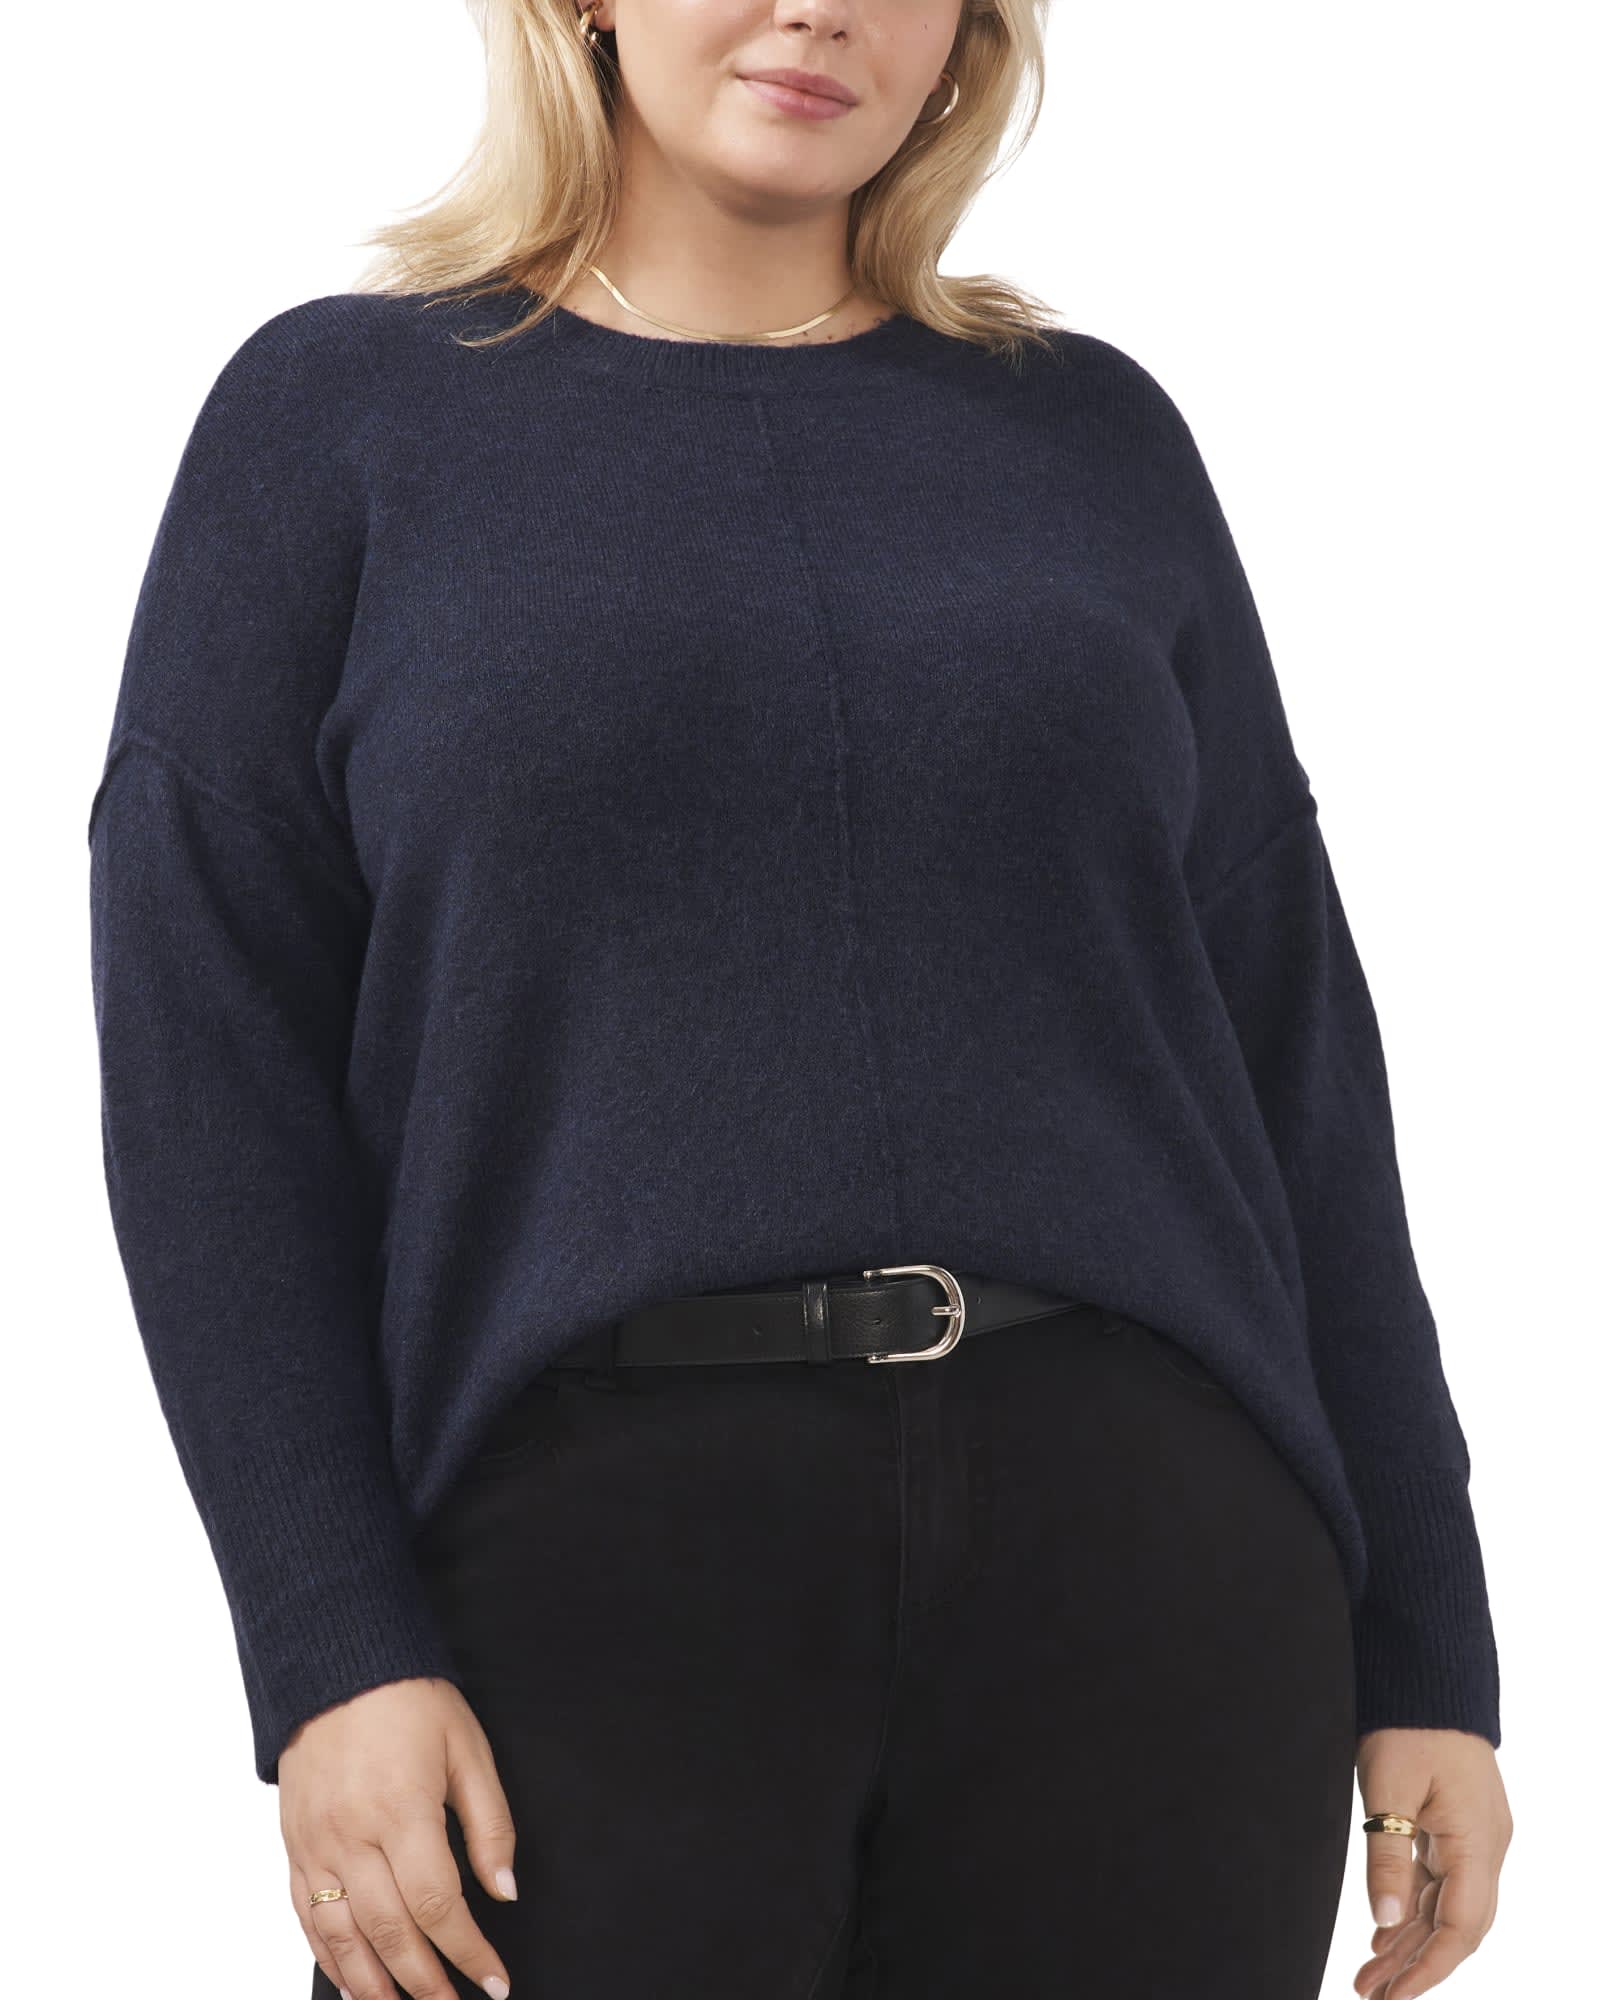 Plus Size Navy Blue Sweaters